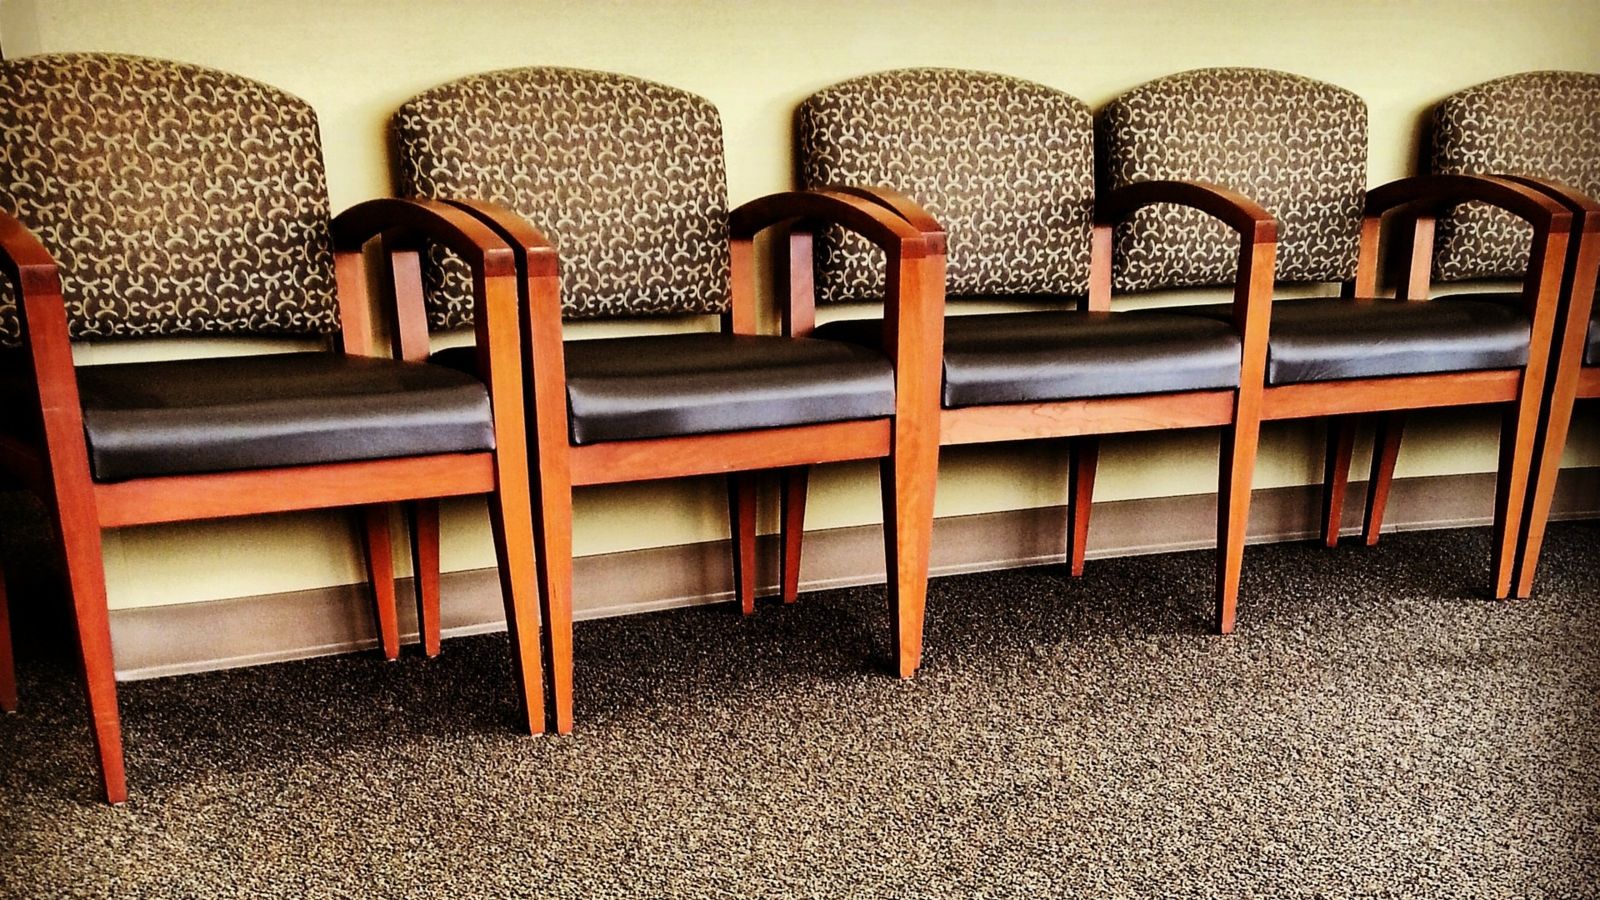 Chairs in a doctor's waiting room